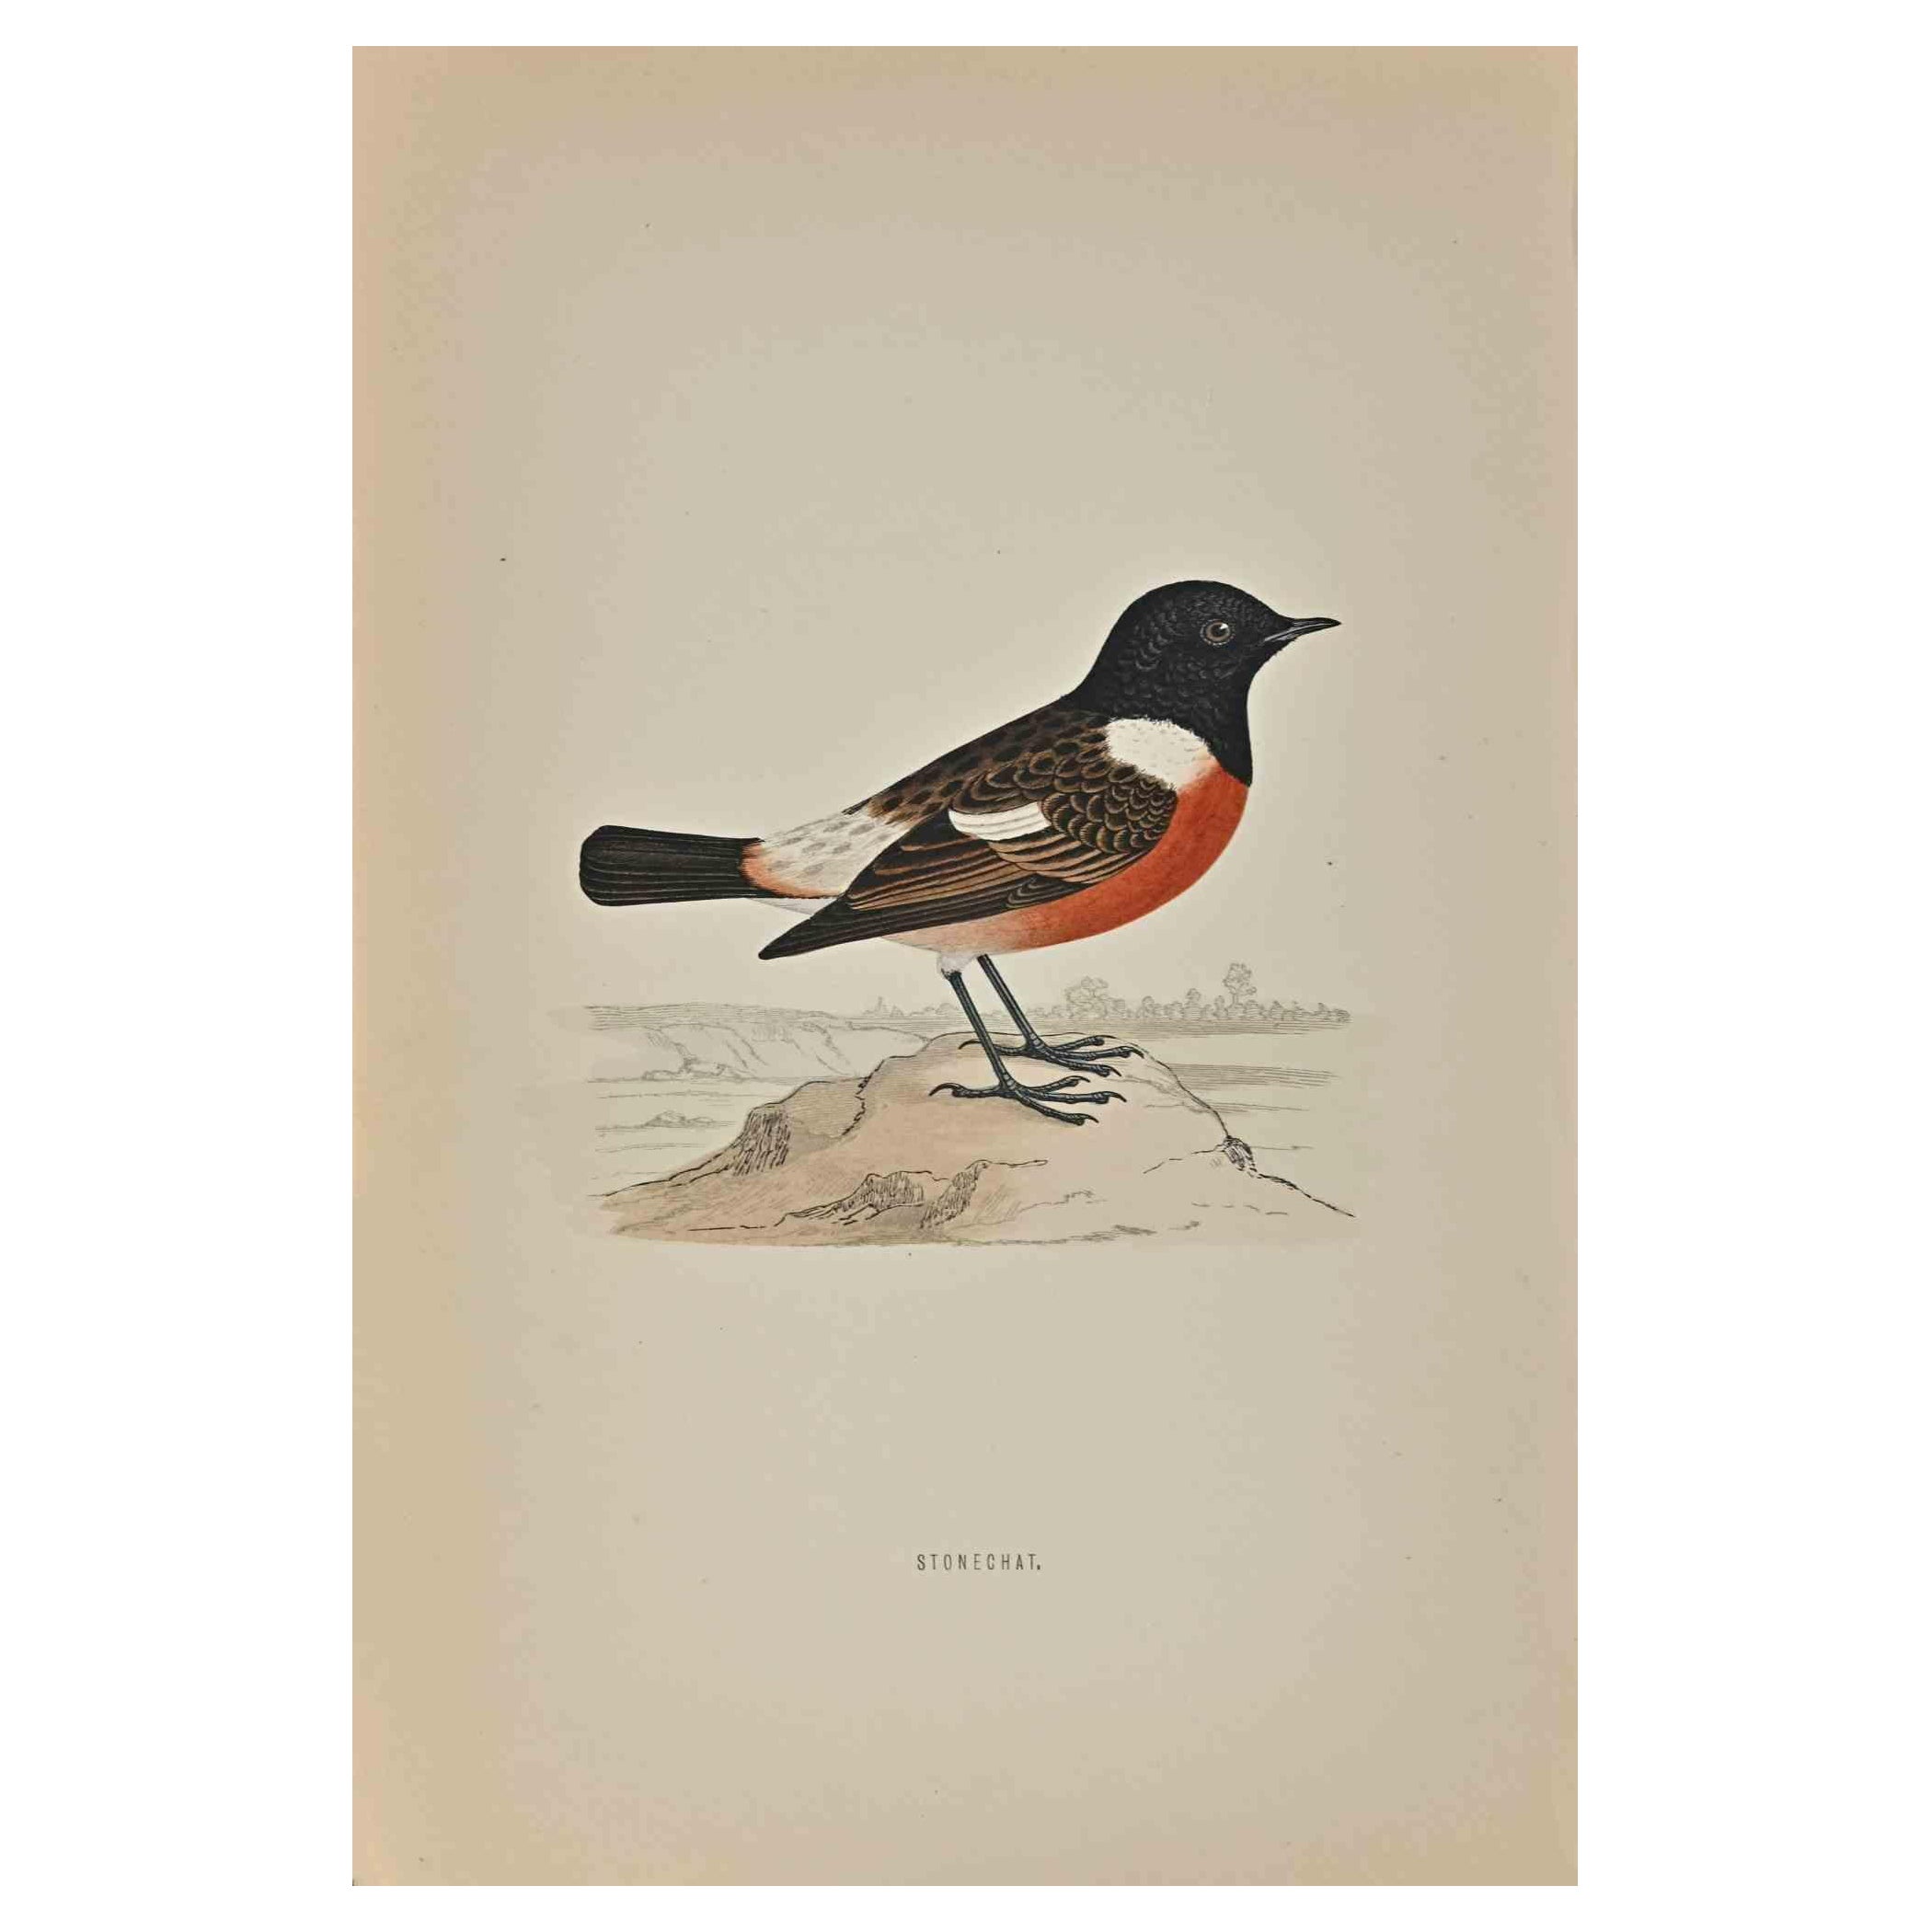 Stonechat is a modern artwork realized in 1870 by the British artist Alexander Francis Lydon (1836-1917) . 

Woodcut print, hand colored, published by London, Bell & Sons, 1870.  Name of the bird printed in plate. This work is part of a print suite